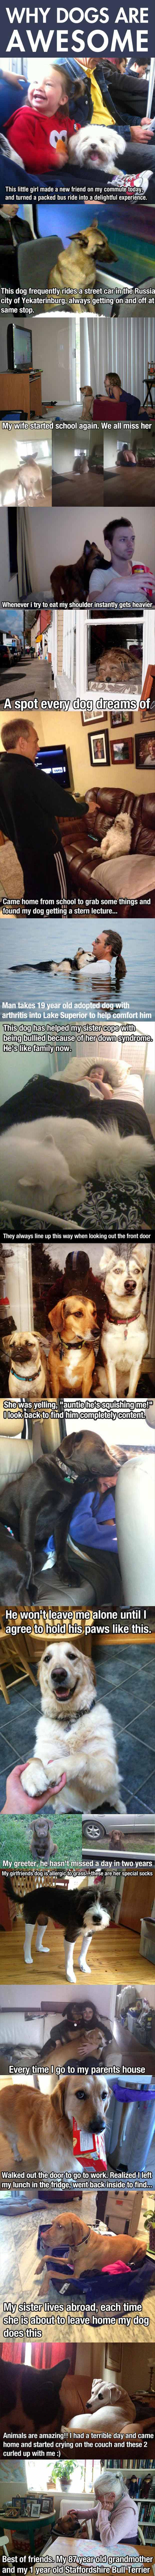 why-dogs-are-awesome